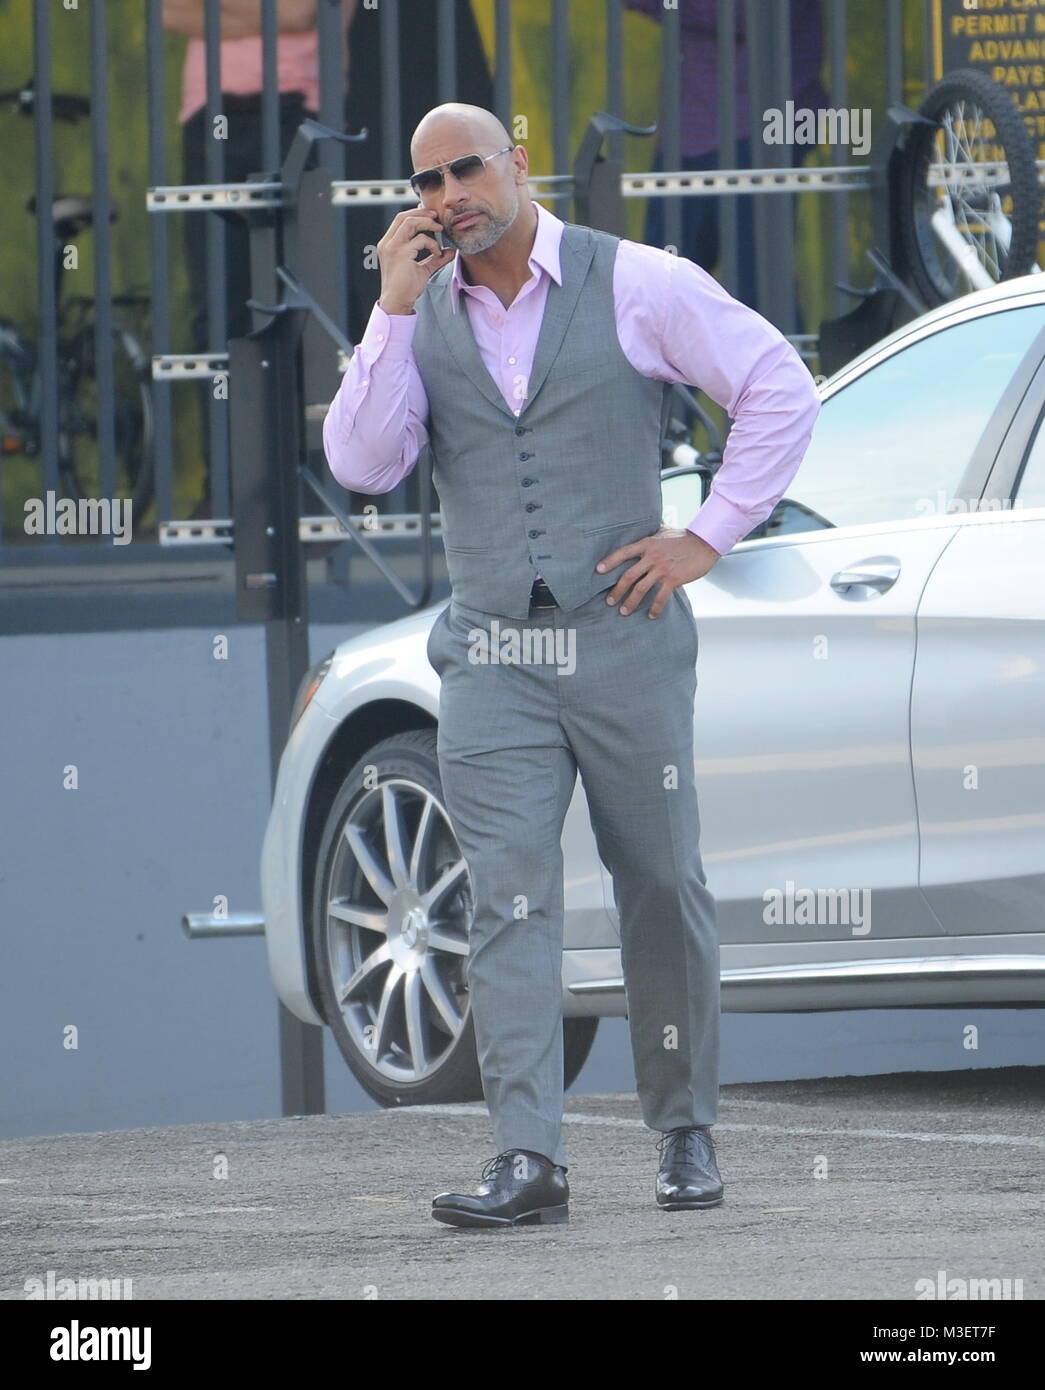 Actor Dwayne Johnson strikes a pose while filming a scene for the hit HBO  series "Ballers" filmin gin downtown Los Angeles. Featuring: Dwayne Johnson  Where: Los Angeles, California, United States When: 10